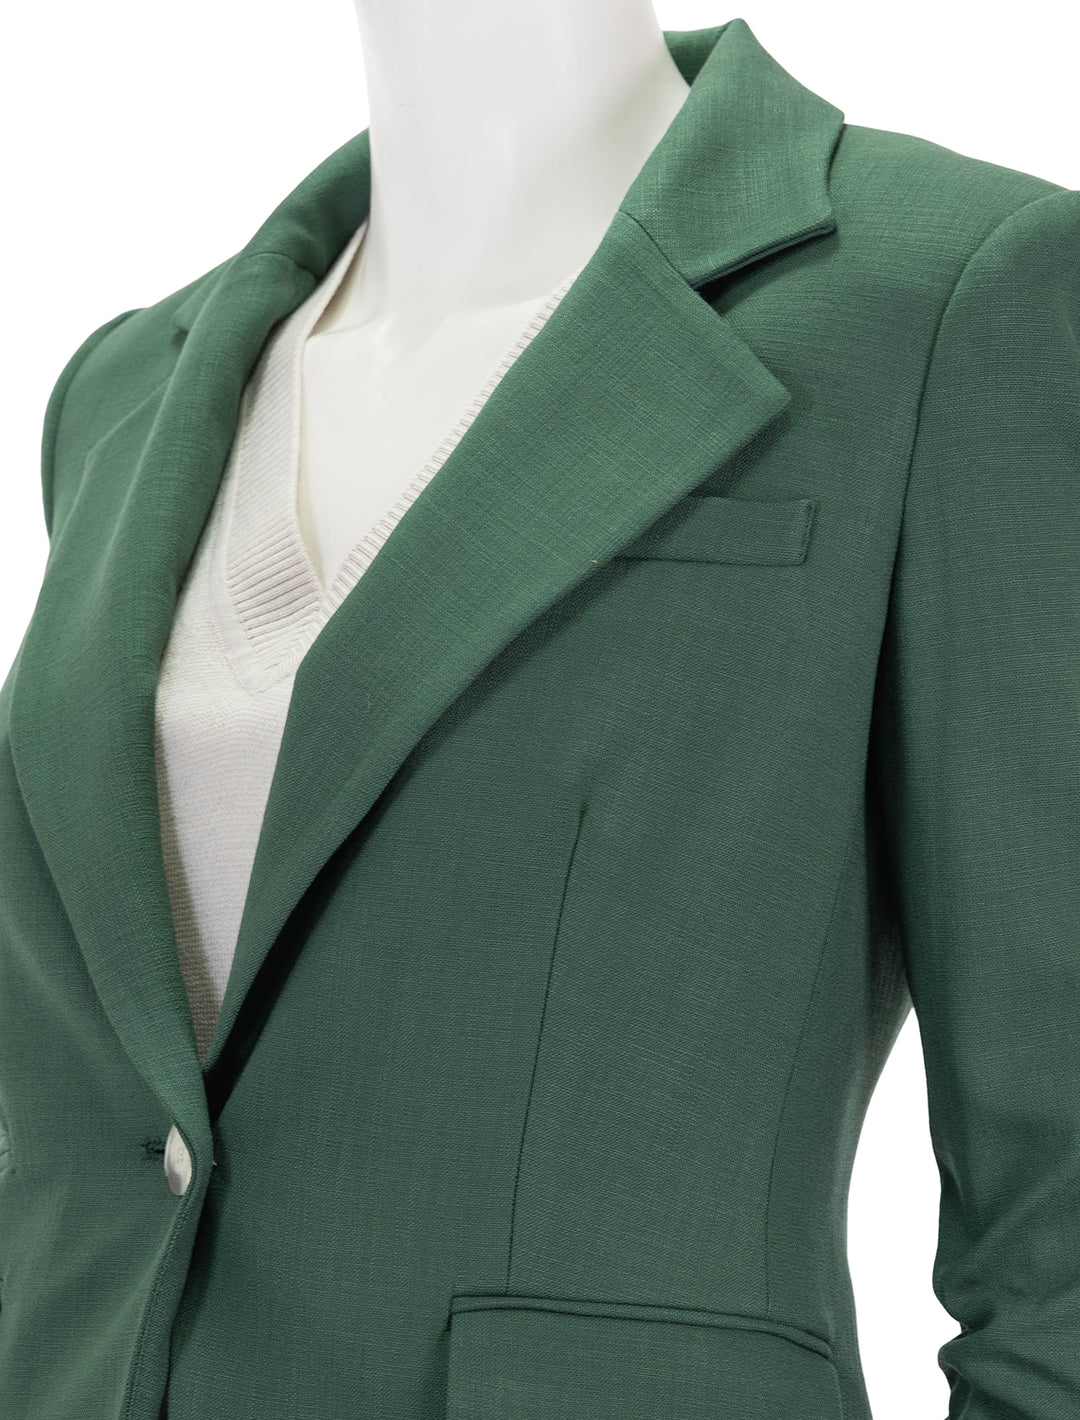 Close-up view of Veronica Beard's battista dickey jacket in forest.